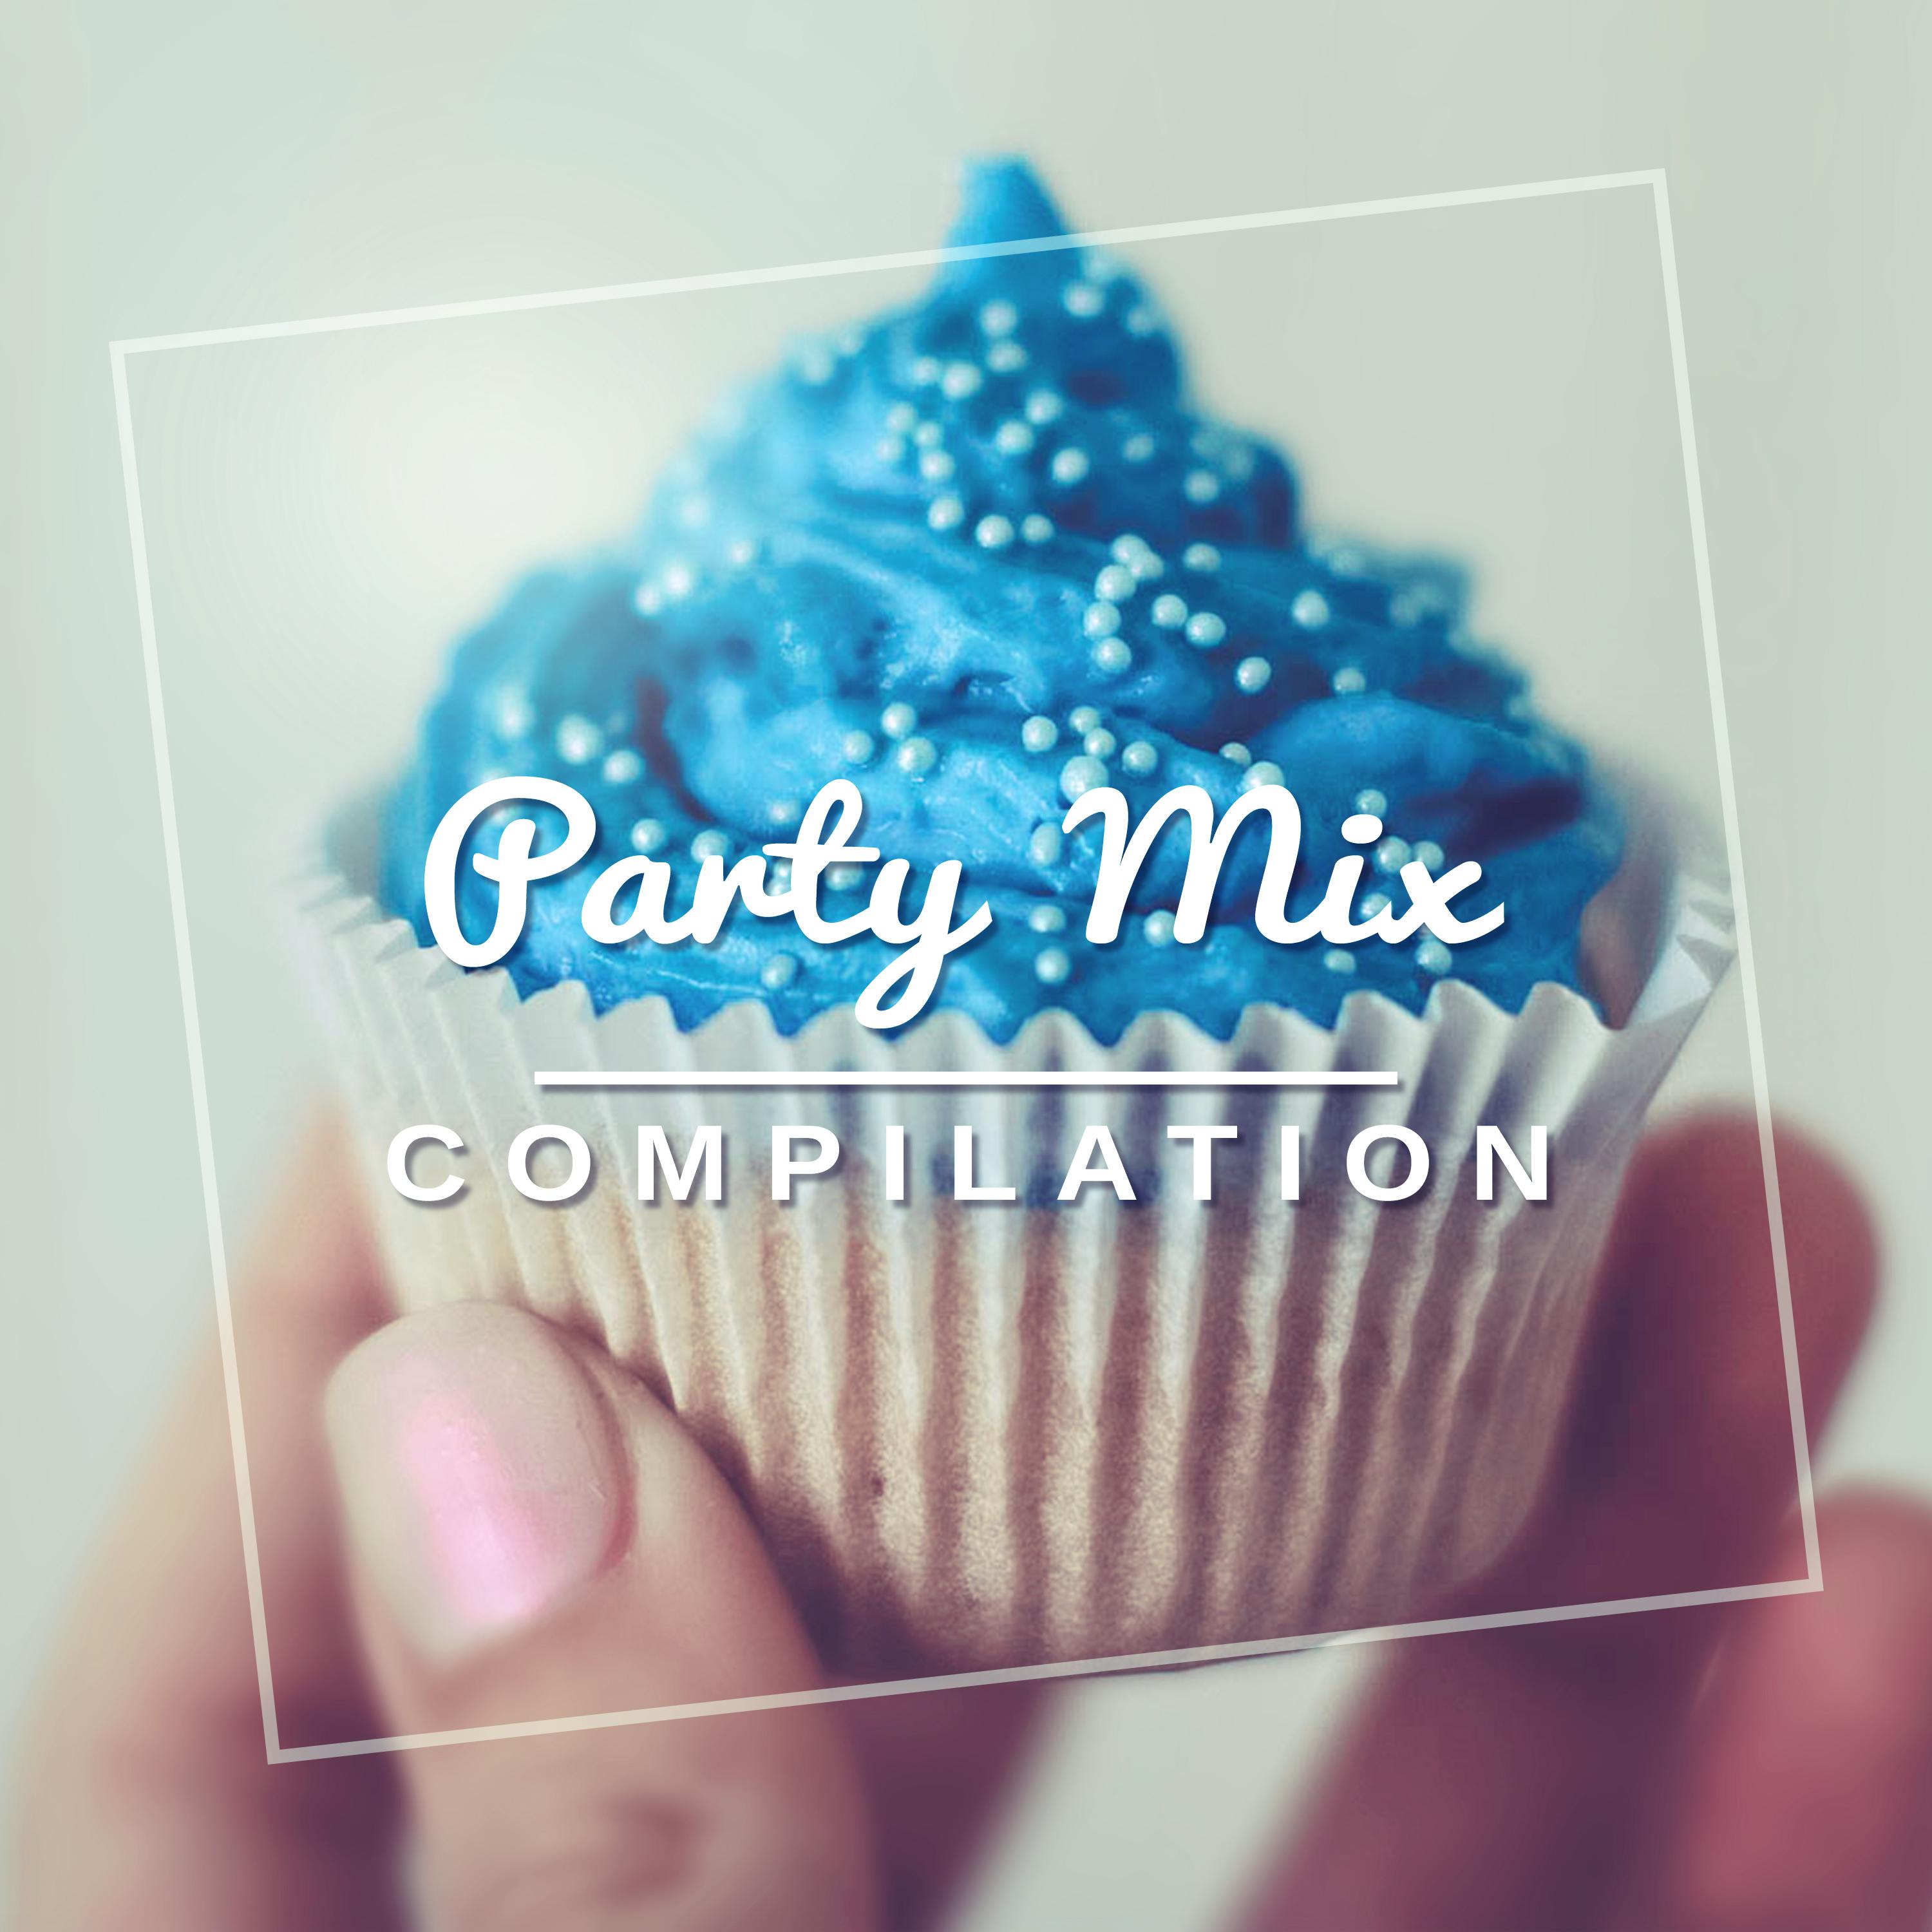 Party Mix Compilation – Chill Out for Party, Dance, Fun, Summertime, Summer 2017, Relax